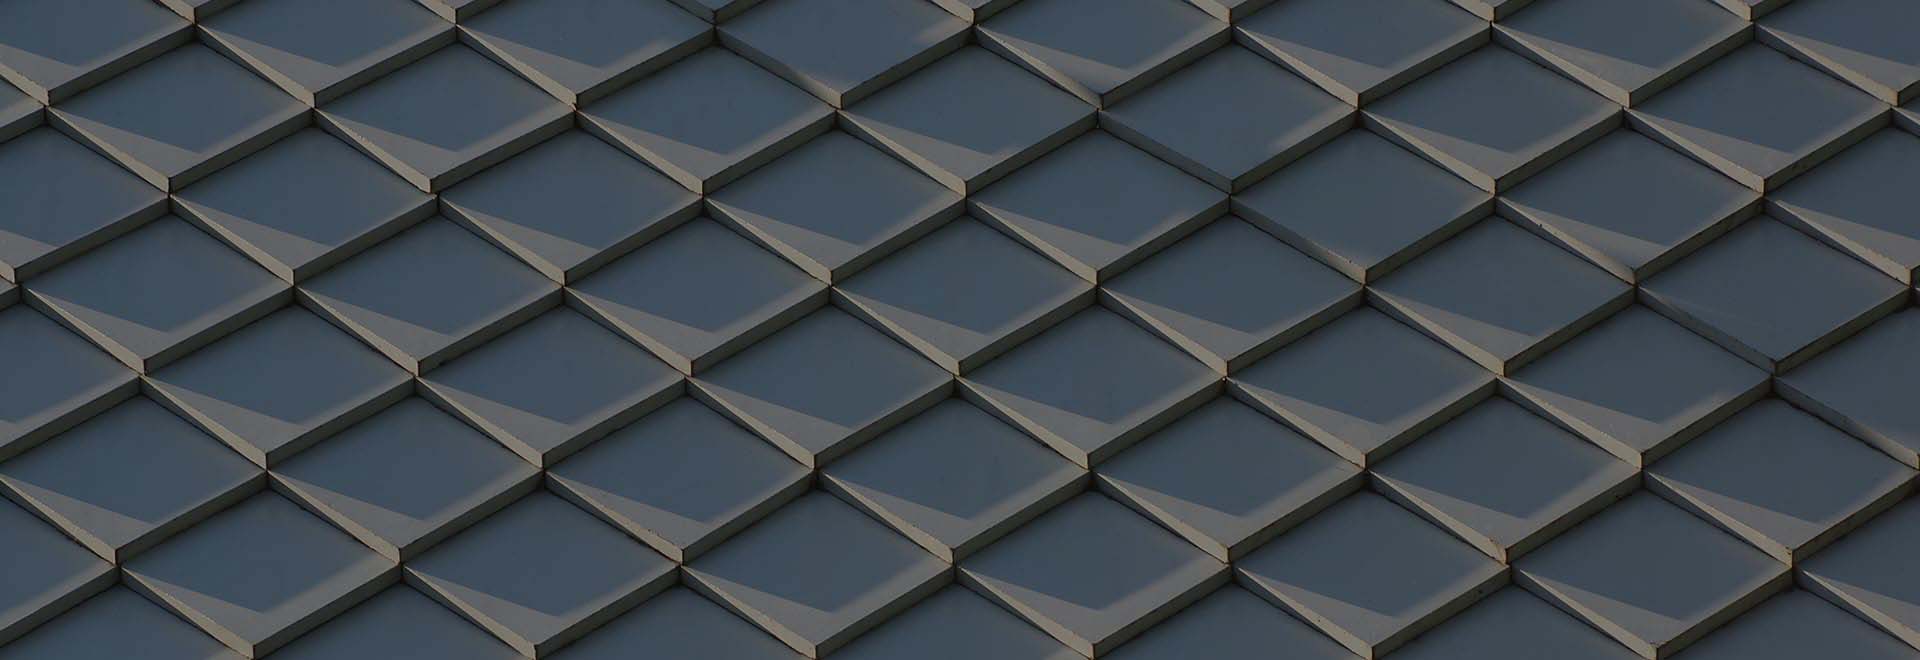 Frisco Roofing Shingles | Invictus Roofing